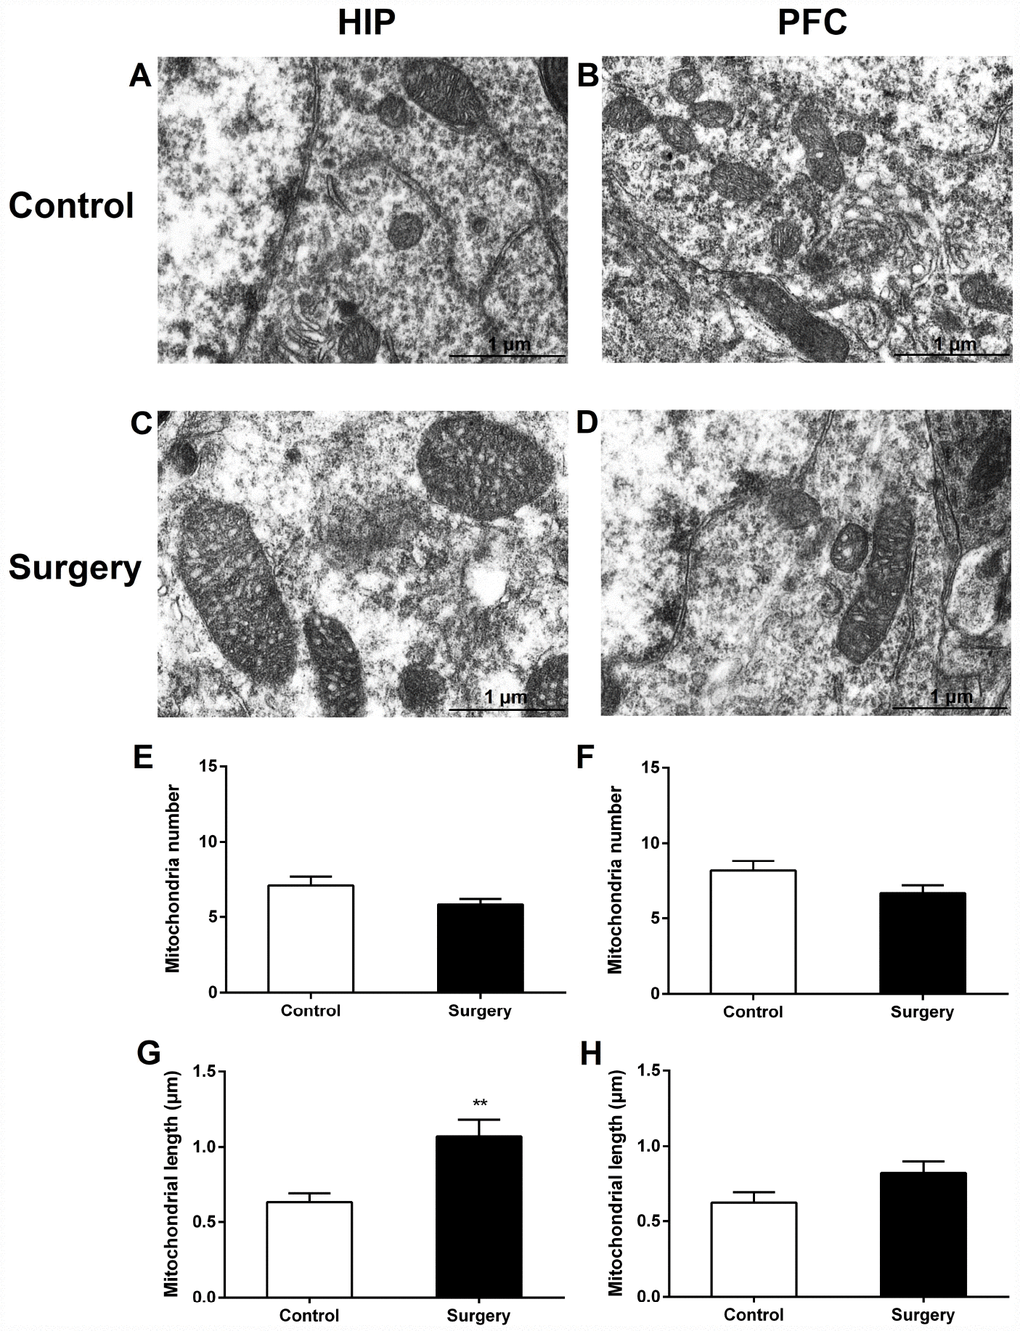 Surgery/Anesthesia caused acute ultrastructural changes in the mitochondria of hippocampal but not prefrontal cortex neurons in aged mice immediately after Surgery/Anesthesia. Mitochondria in the cytoplasm of hippocampal (A) and prefrontal cortex (B) neurons from the control mice resemble long tubules with intact outer and inner membranes and numerous cristae tightly packed in healthy looking matrix. Compared with those in the control group, mitochondria in the cytoplasm of hippocampal neurons (C) from mice in the Surgery/Anesthesia group became swollen, while the ultrastructure of mitochondria in the prefrontal cortex neurons (D) was normal immediately after Surgery/Anesthesia. The number and length of mitochondria were measured in the hippocampus (E, G) and prefrontal cortex (F, H) in 6 different fields of view per animal. (G) Surgery/Anesthesia increased mitochondrial length in the hippocampus compared to the control condition at 0 hour postoperatively. Scale bar: 1 μm. The data are plotted as the mean ± standard error of the mean for each group (n = 3). **p 